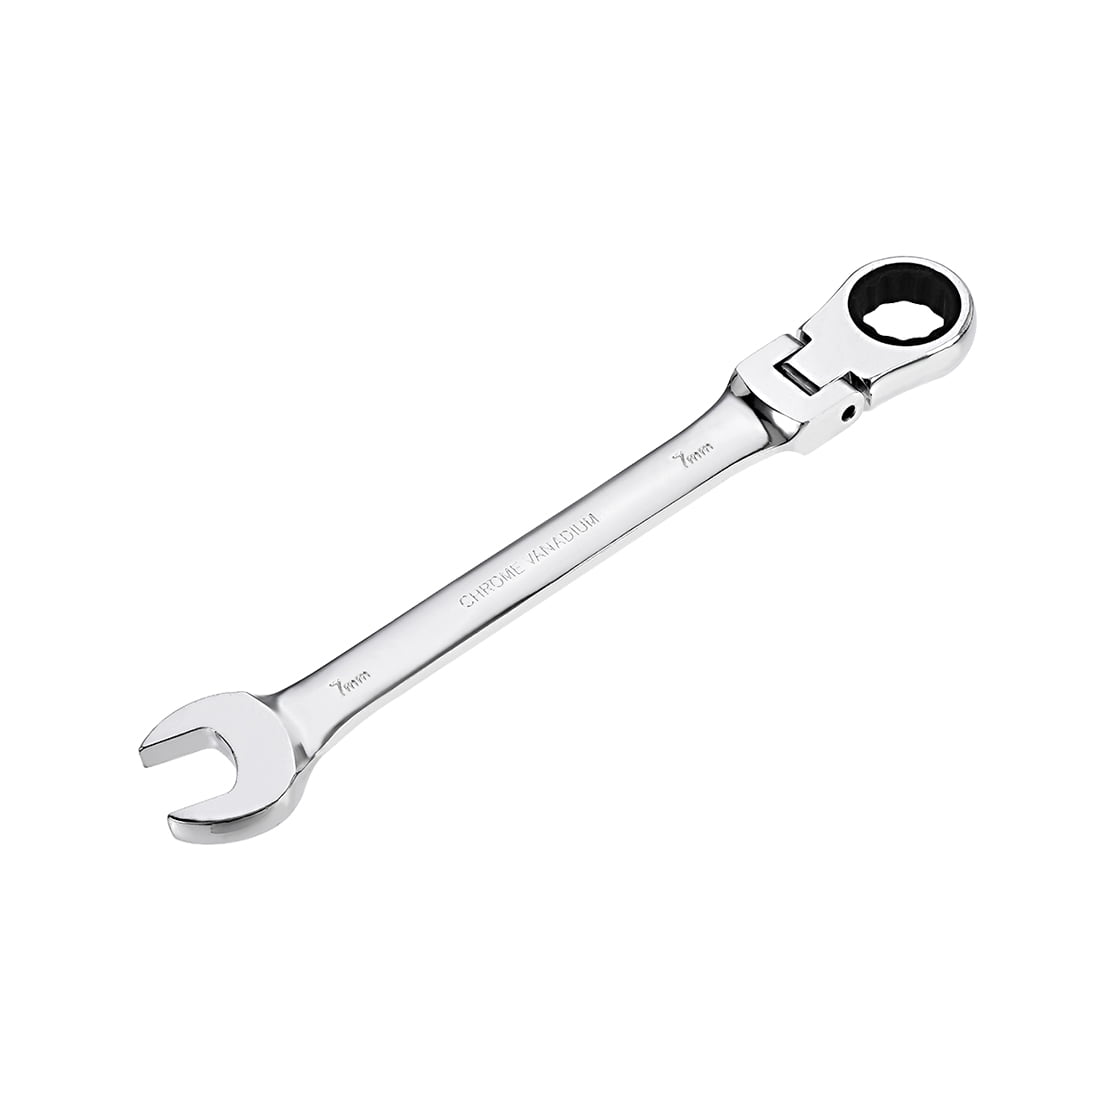 uxcell 15mm Metric L Shaped Angled Hex Socket Wrench Chrome Plated Cr-V 